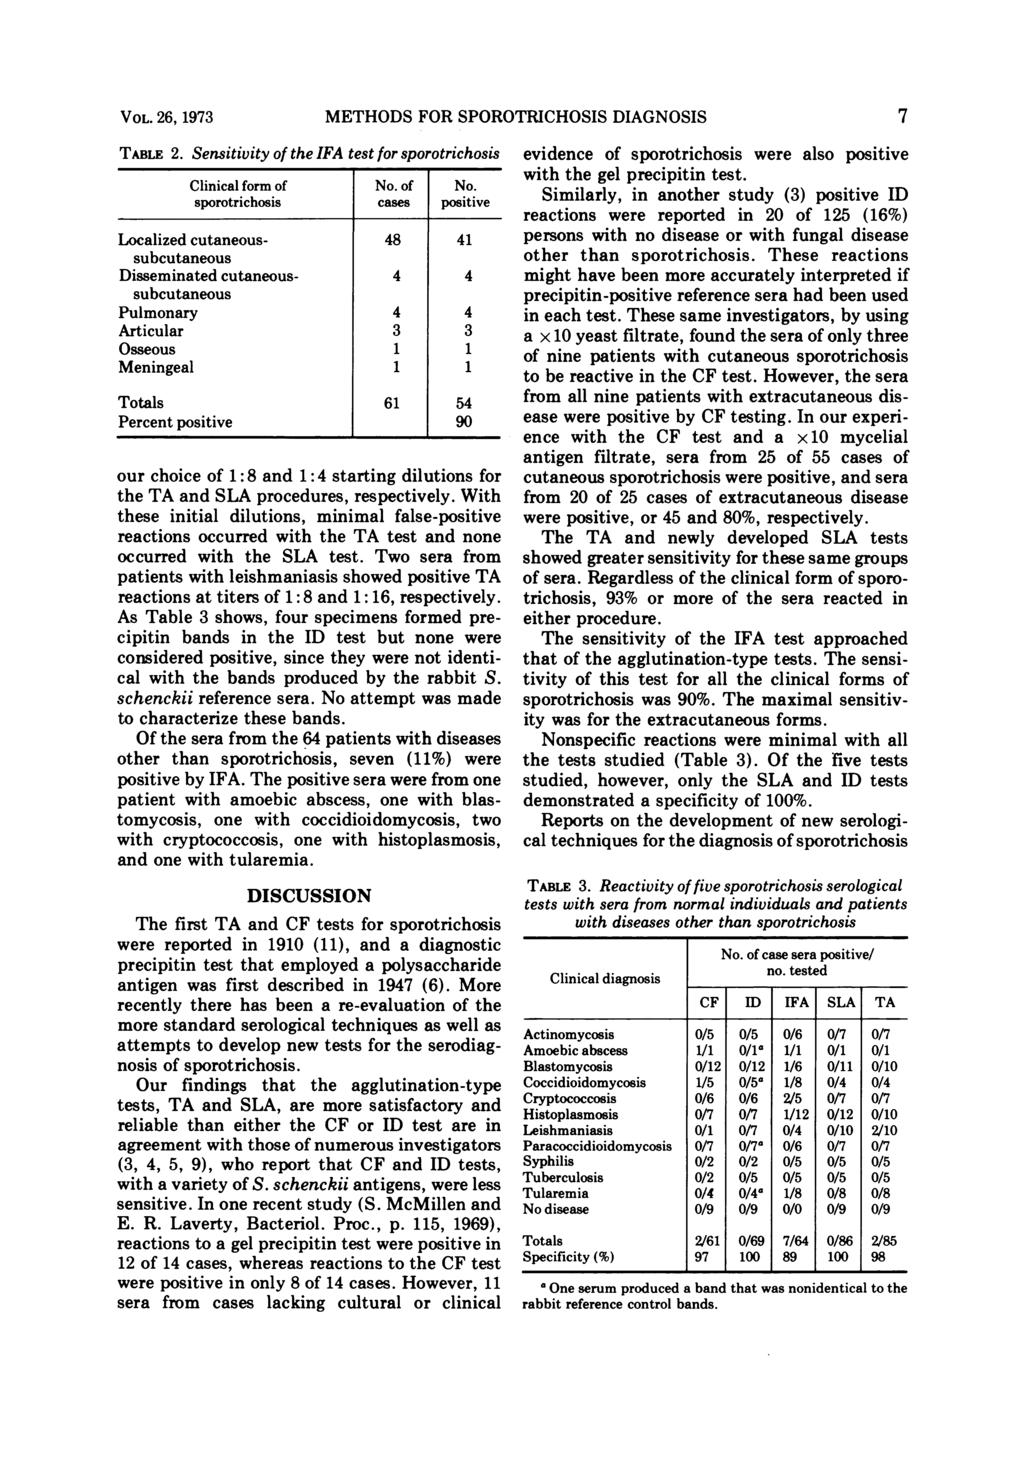 VOL. 26, 1973 METHODS FOR SPOROTRICHOSIS DIAGNOSIS 7 TABLE 2. Sensitivity of the IFA test for sporotrichosis Clinical form of No.